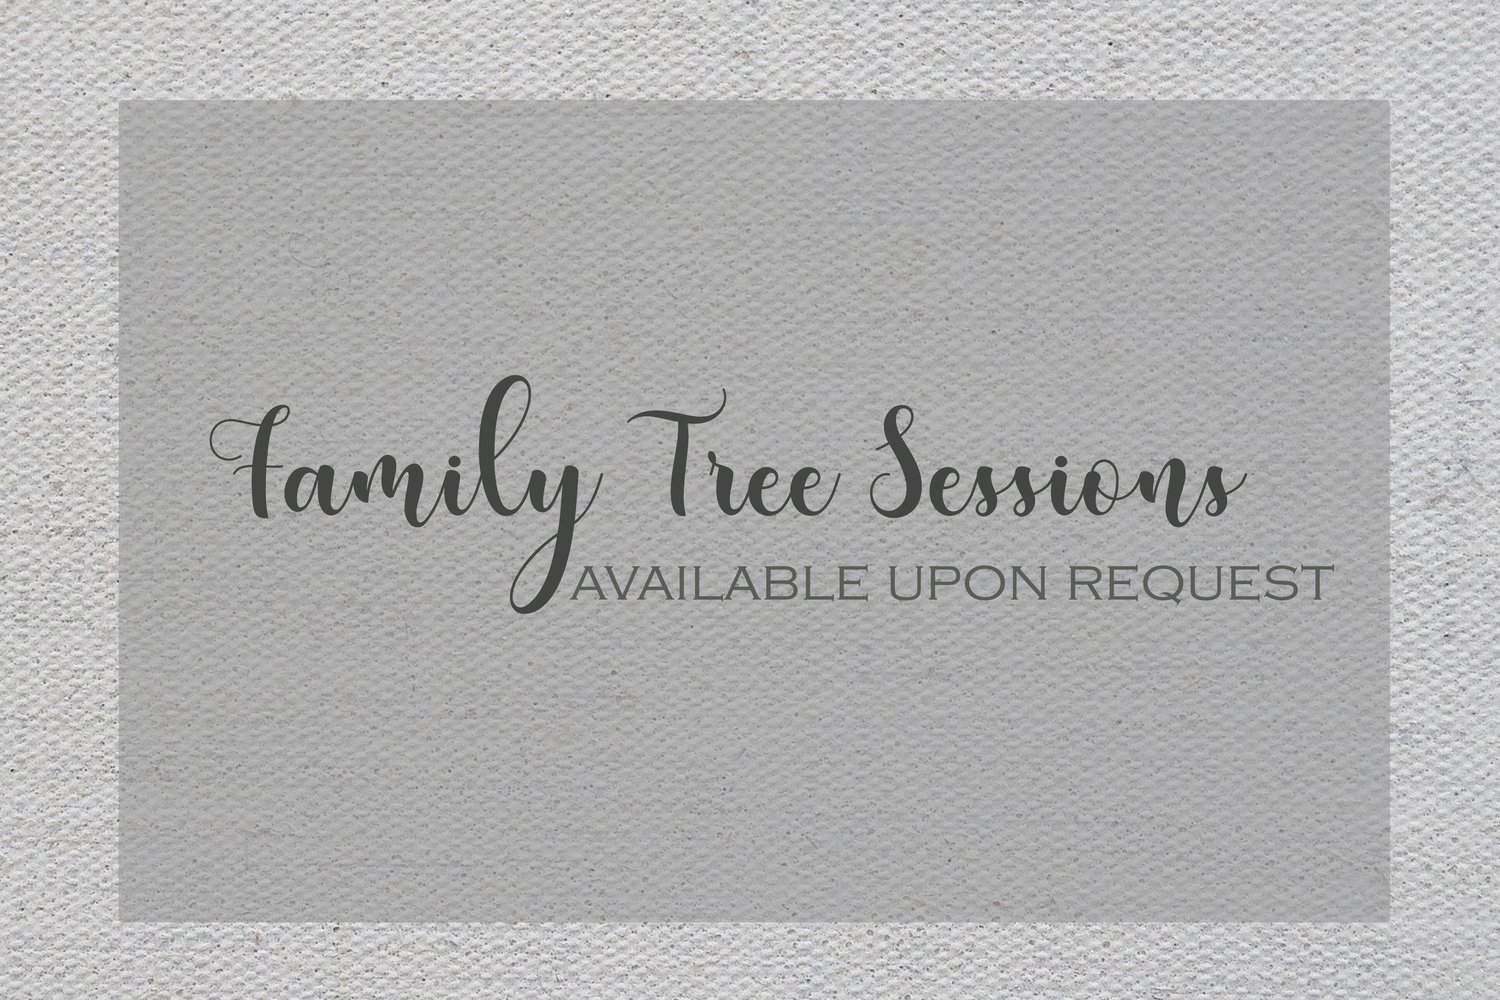 Image of FAMILY TREE SESSIONS